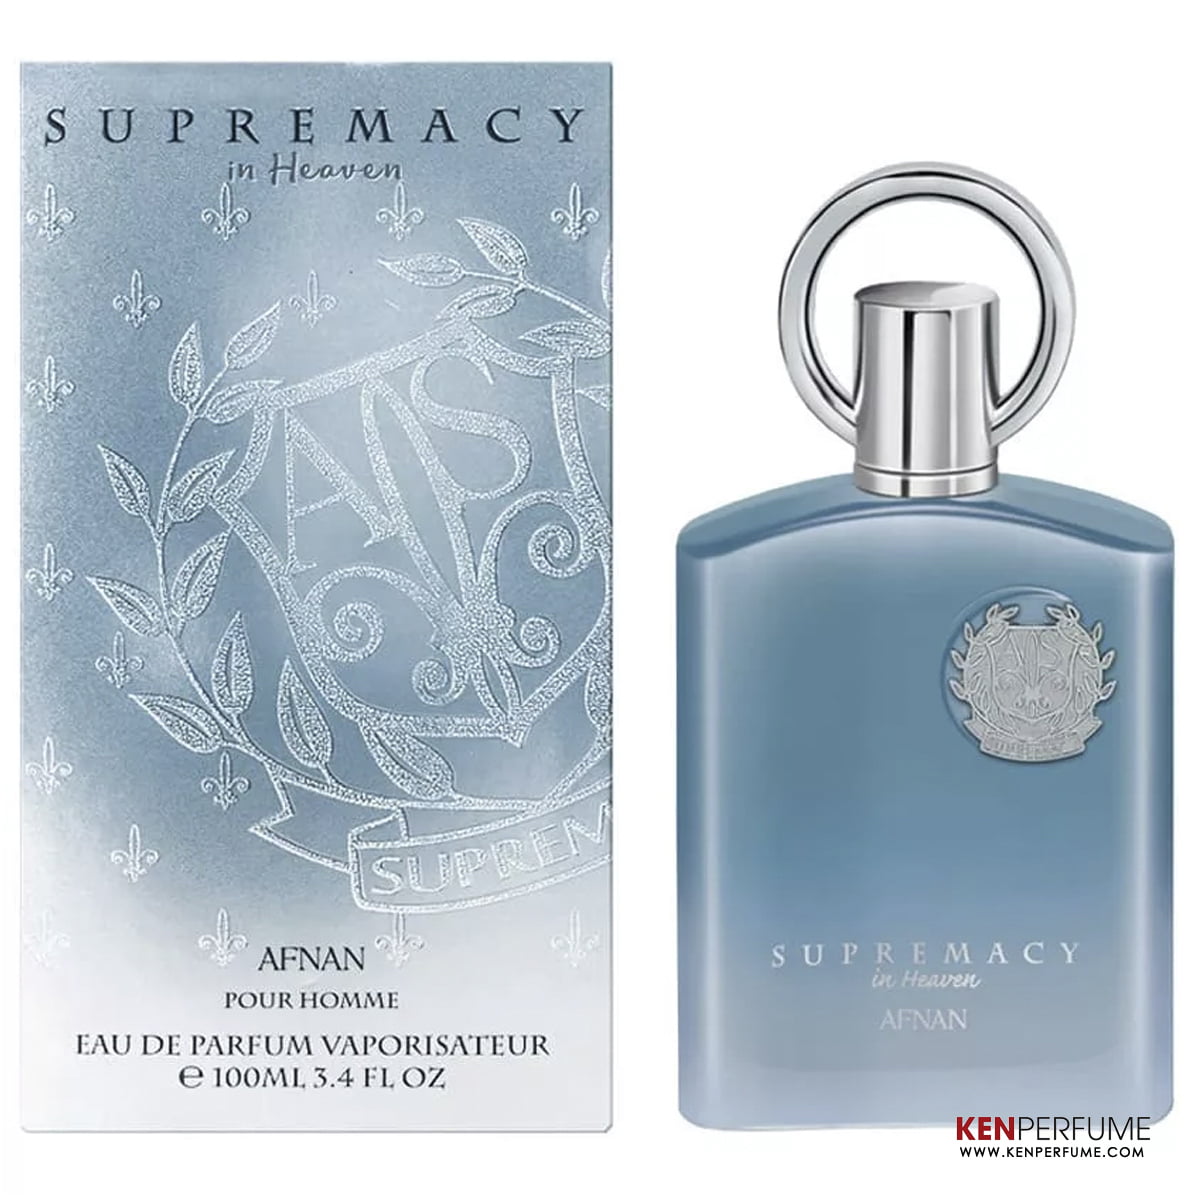 Afnan Supremacy in Oud EDP Linh Perfume